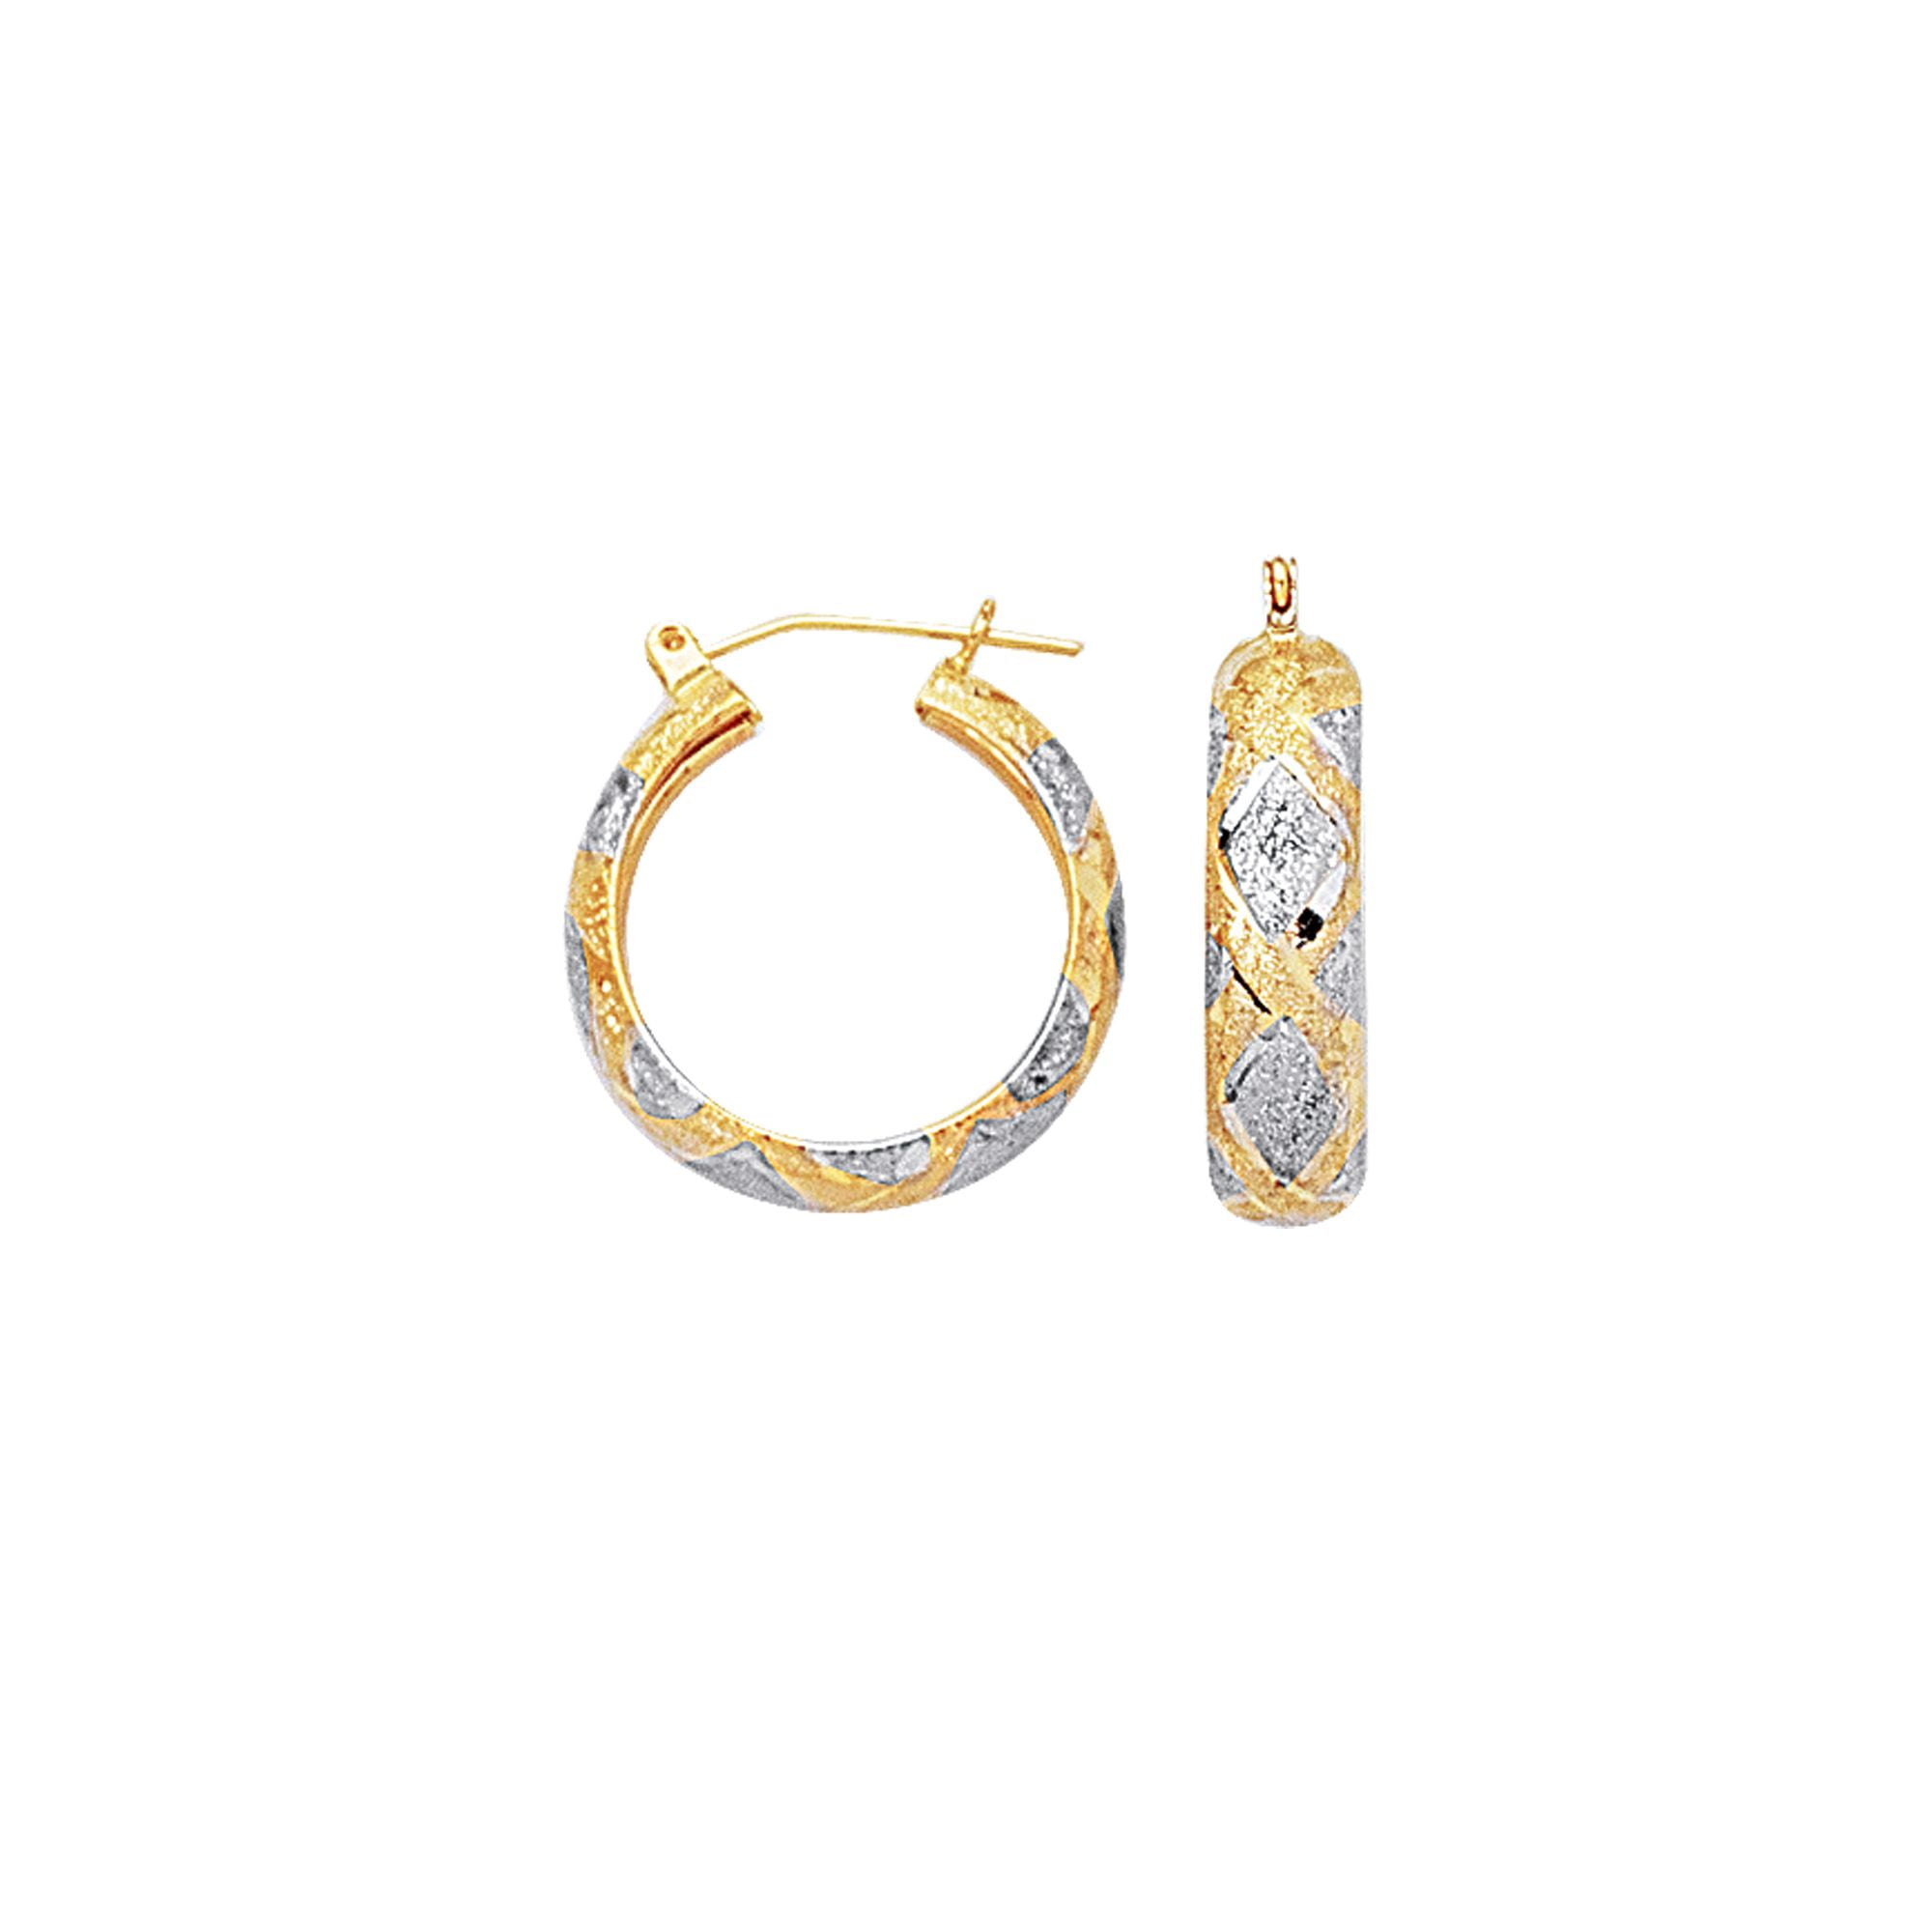 10K Yellow Rose or White Gold Shiny Diamond Cut Sparkle Earrings Hoops with Hinged by IcedTime 